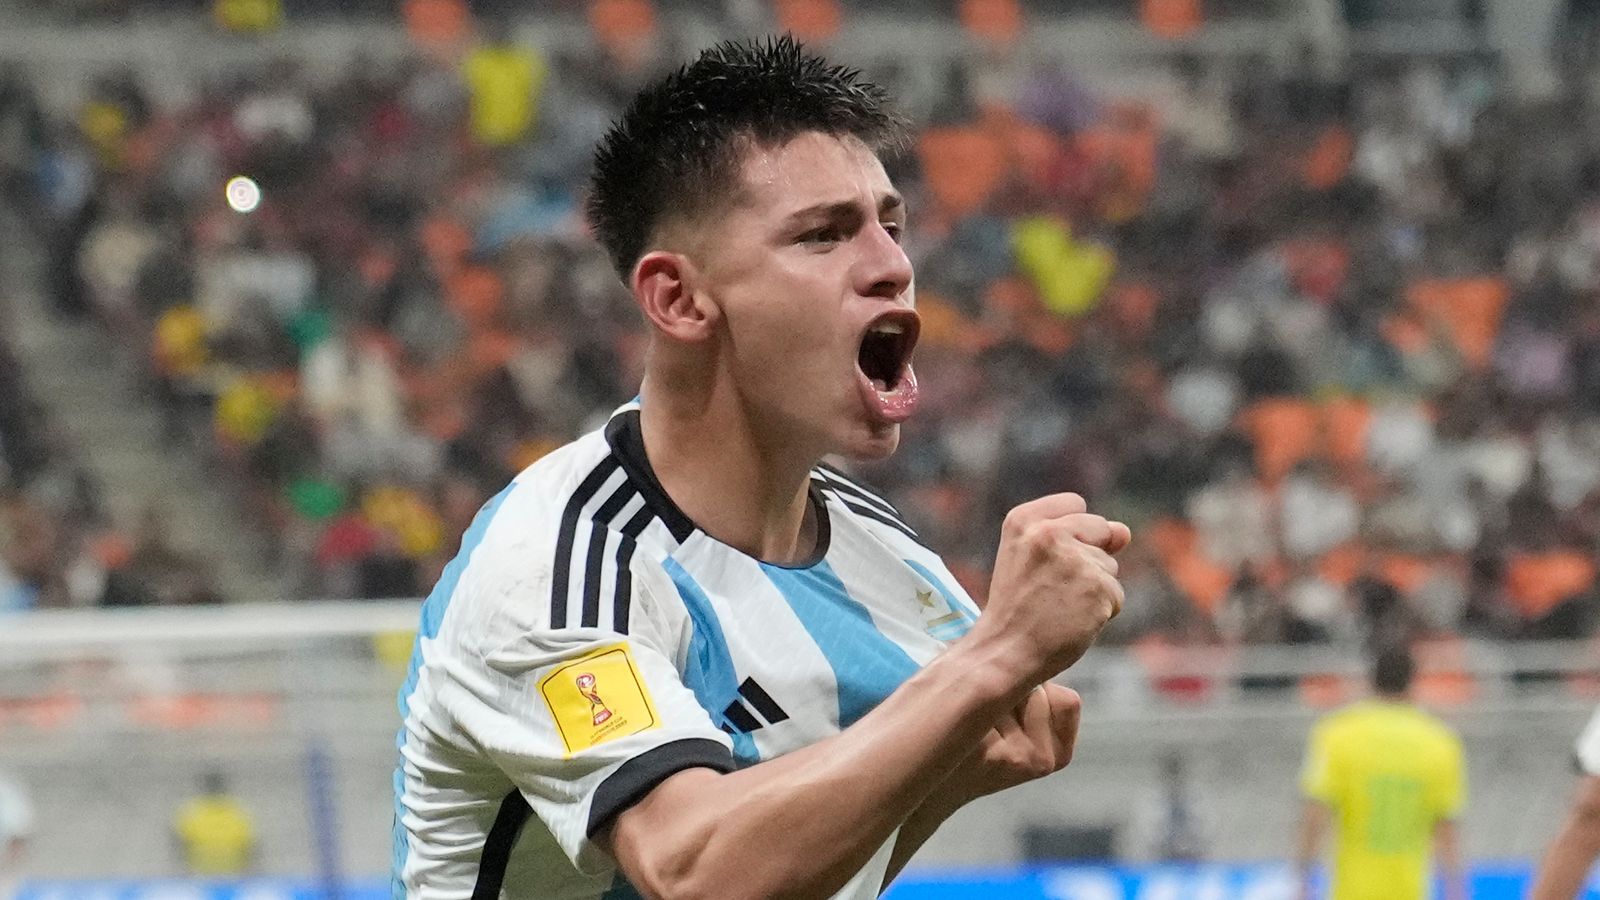 Argentina's Claudio Echeverri celebrates after scoring the second goal for his team during their FIFA U-17 World Cup quarterfinal soccer match against Brazil